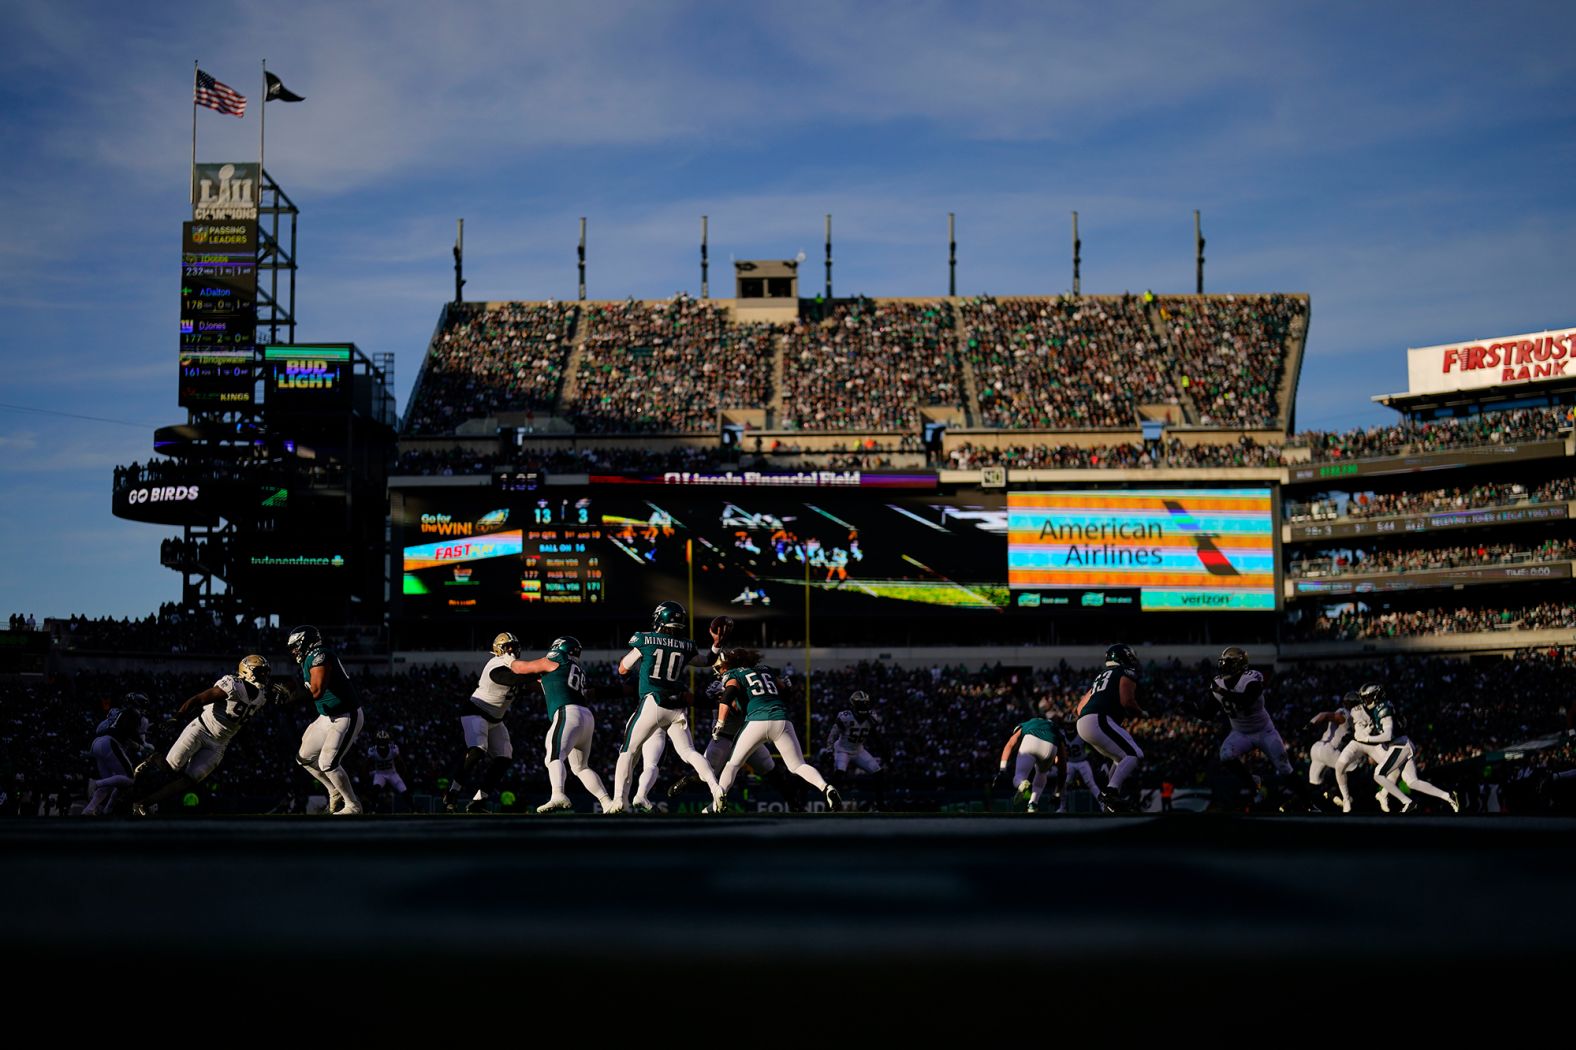 Philadelphia Eagles quarterback Gardner Minshew passes against New Orleans on Sunday, January 1. <a href="index.php?page=&url=http%3A%2F%2Fwww.cnn.com%2F2022%2F09%2F12%2Fsport%2Fgallery%2Fnfl-2022-season%2Findex.html" target="_blank">See the best photos from the 2022 NFL season</a>.